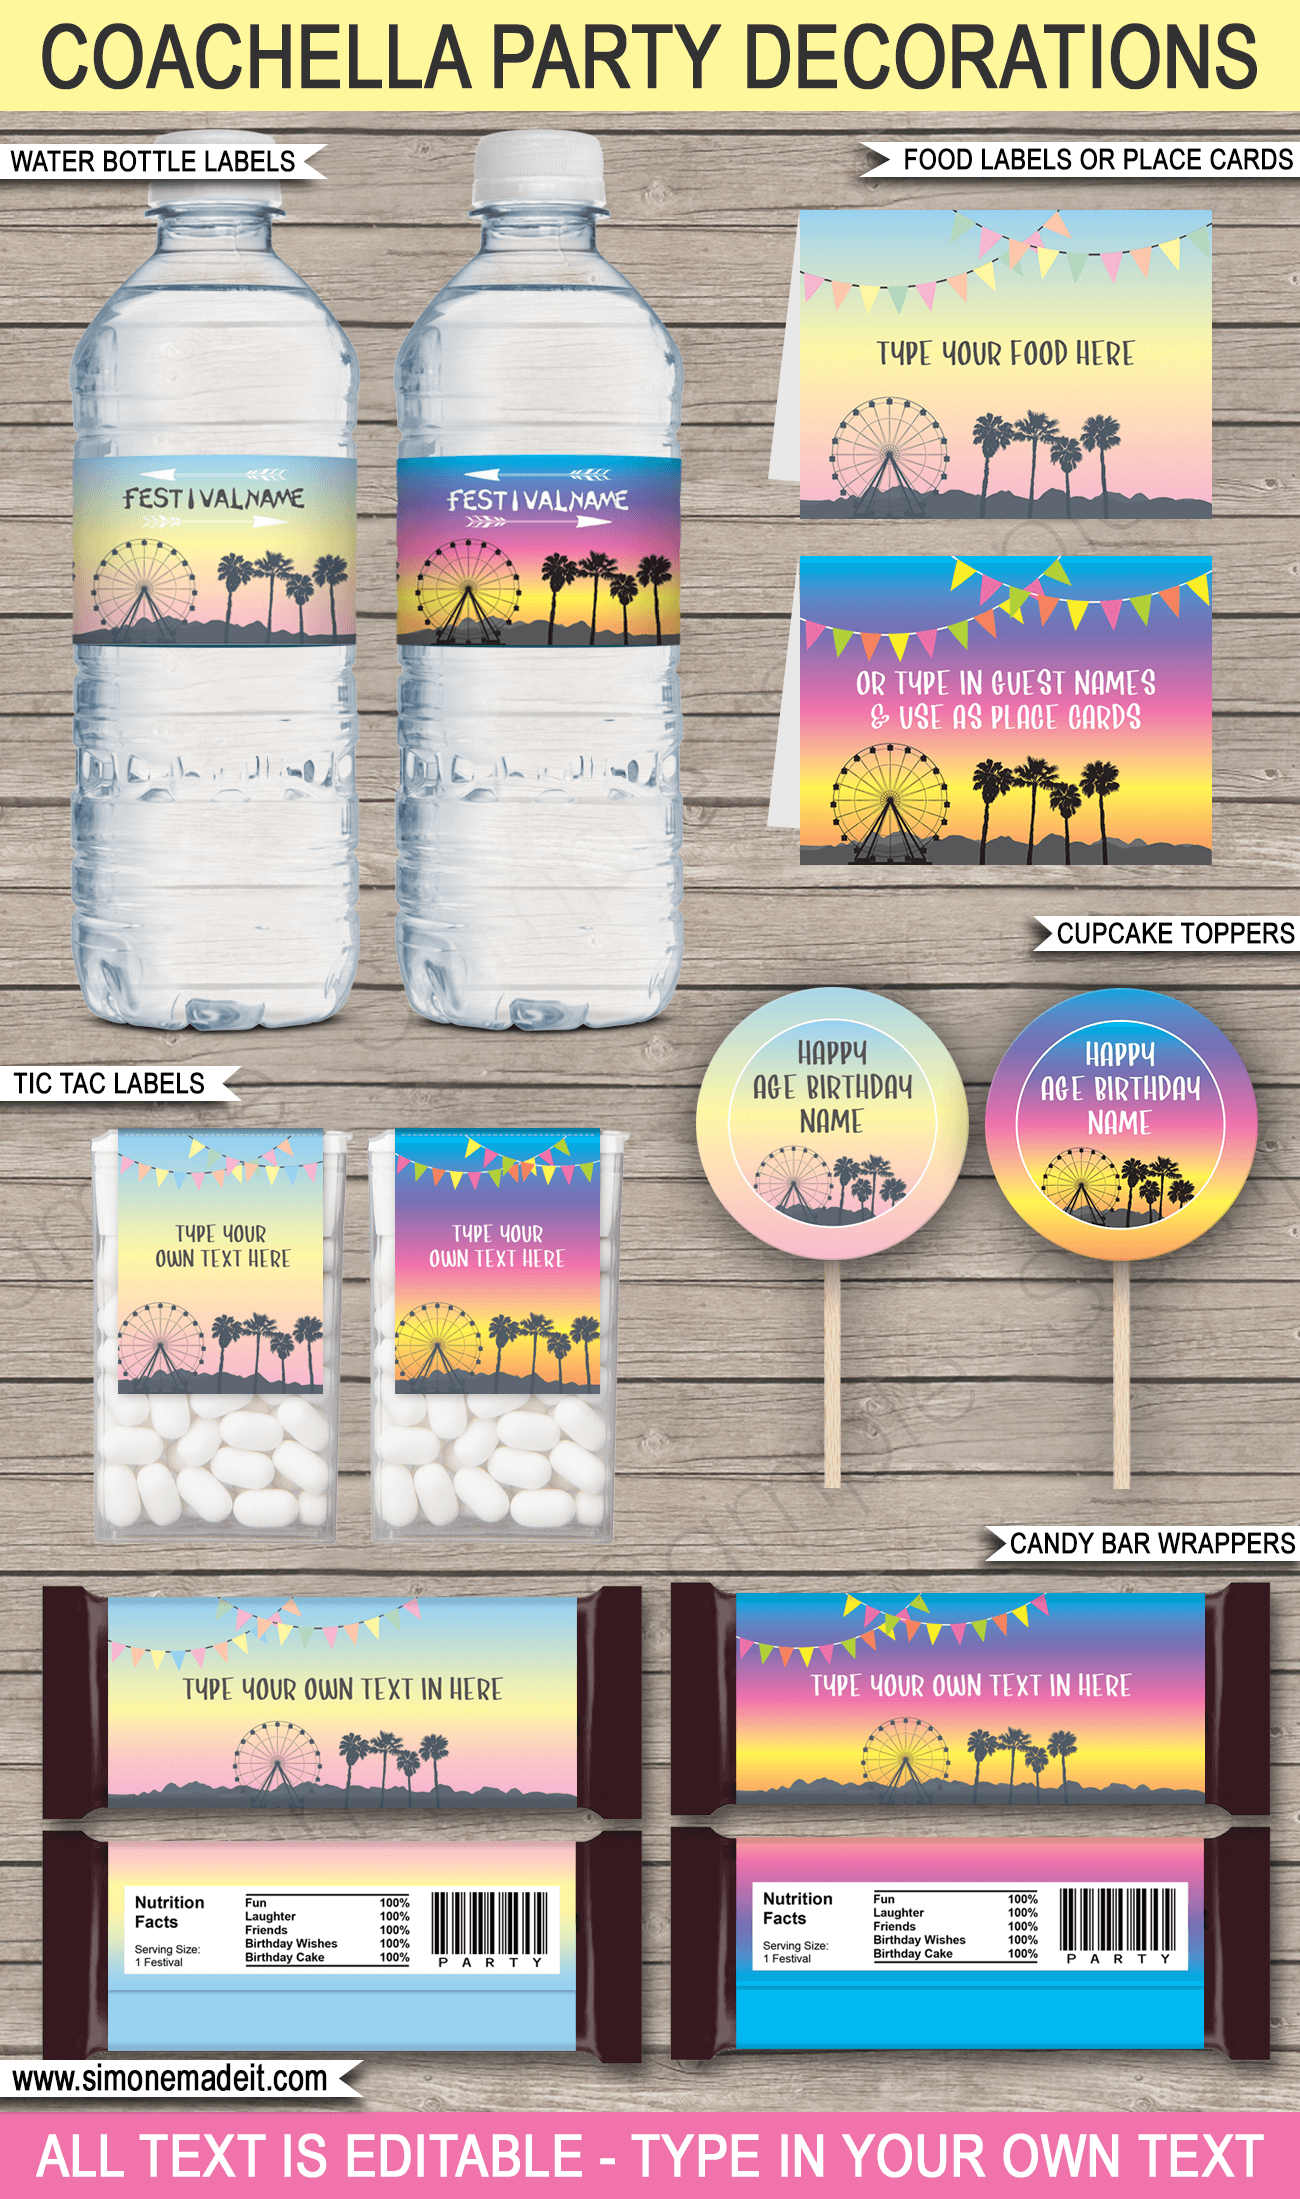 Coachella Birthday Party Food Ideas & Decorations | Editable &amp; Printable Templates | Coachella Themed | Coachella Inspired | Music Festival | Water Bottle Labels, Food Labels, Place Cards, Tic Tac Labels, Cupcake Toppers, Candy Bar Toppers